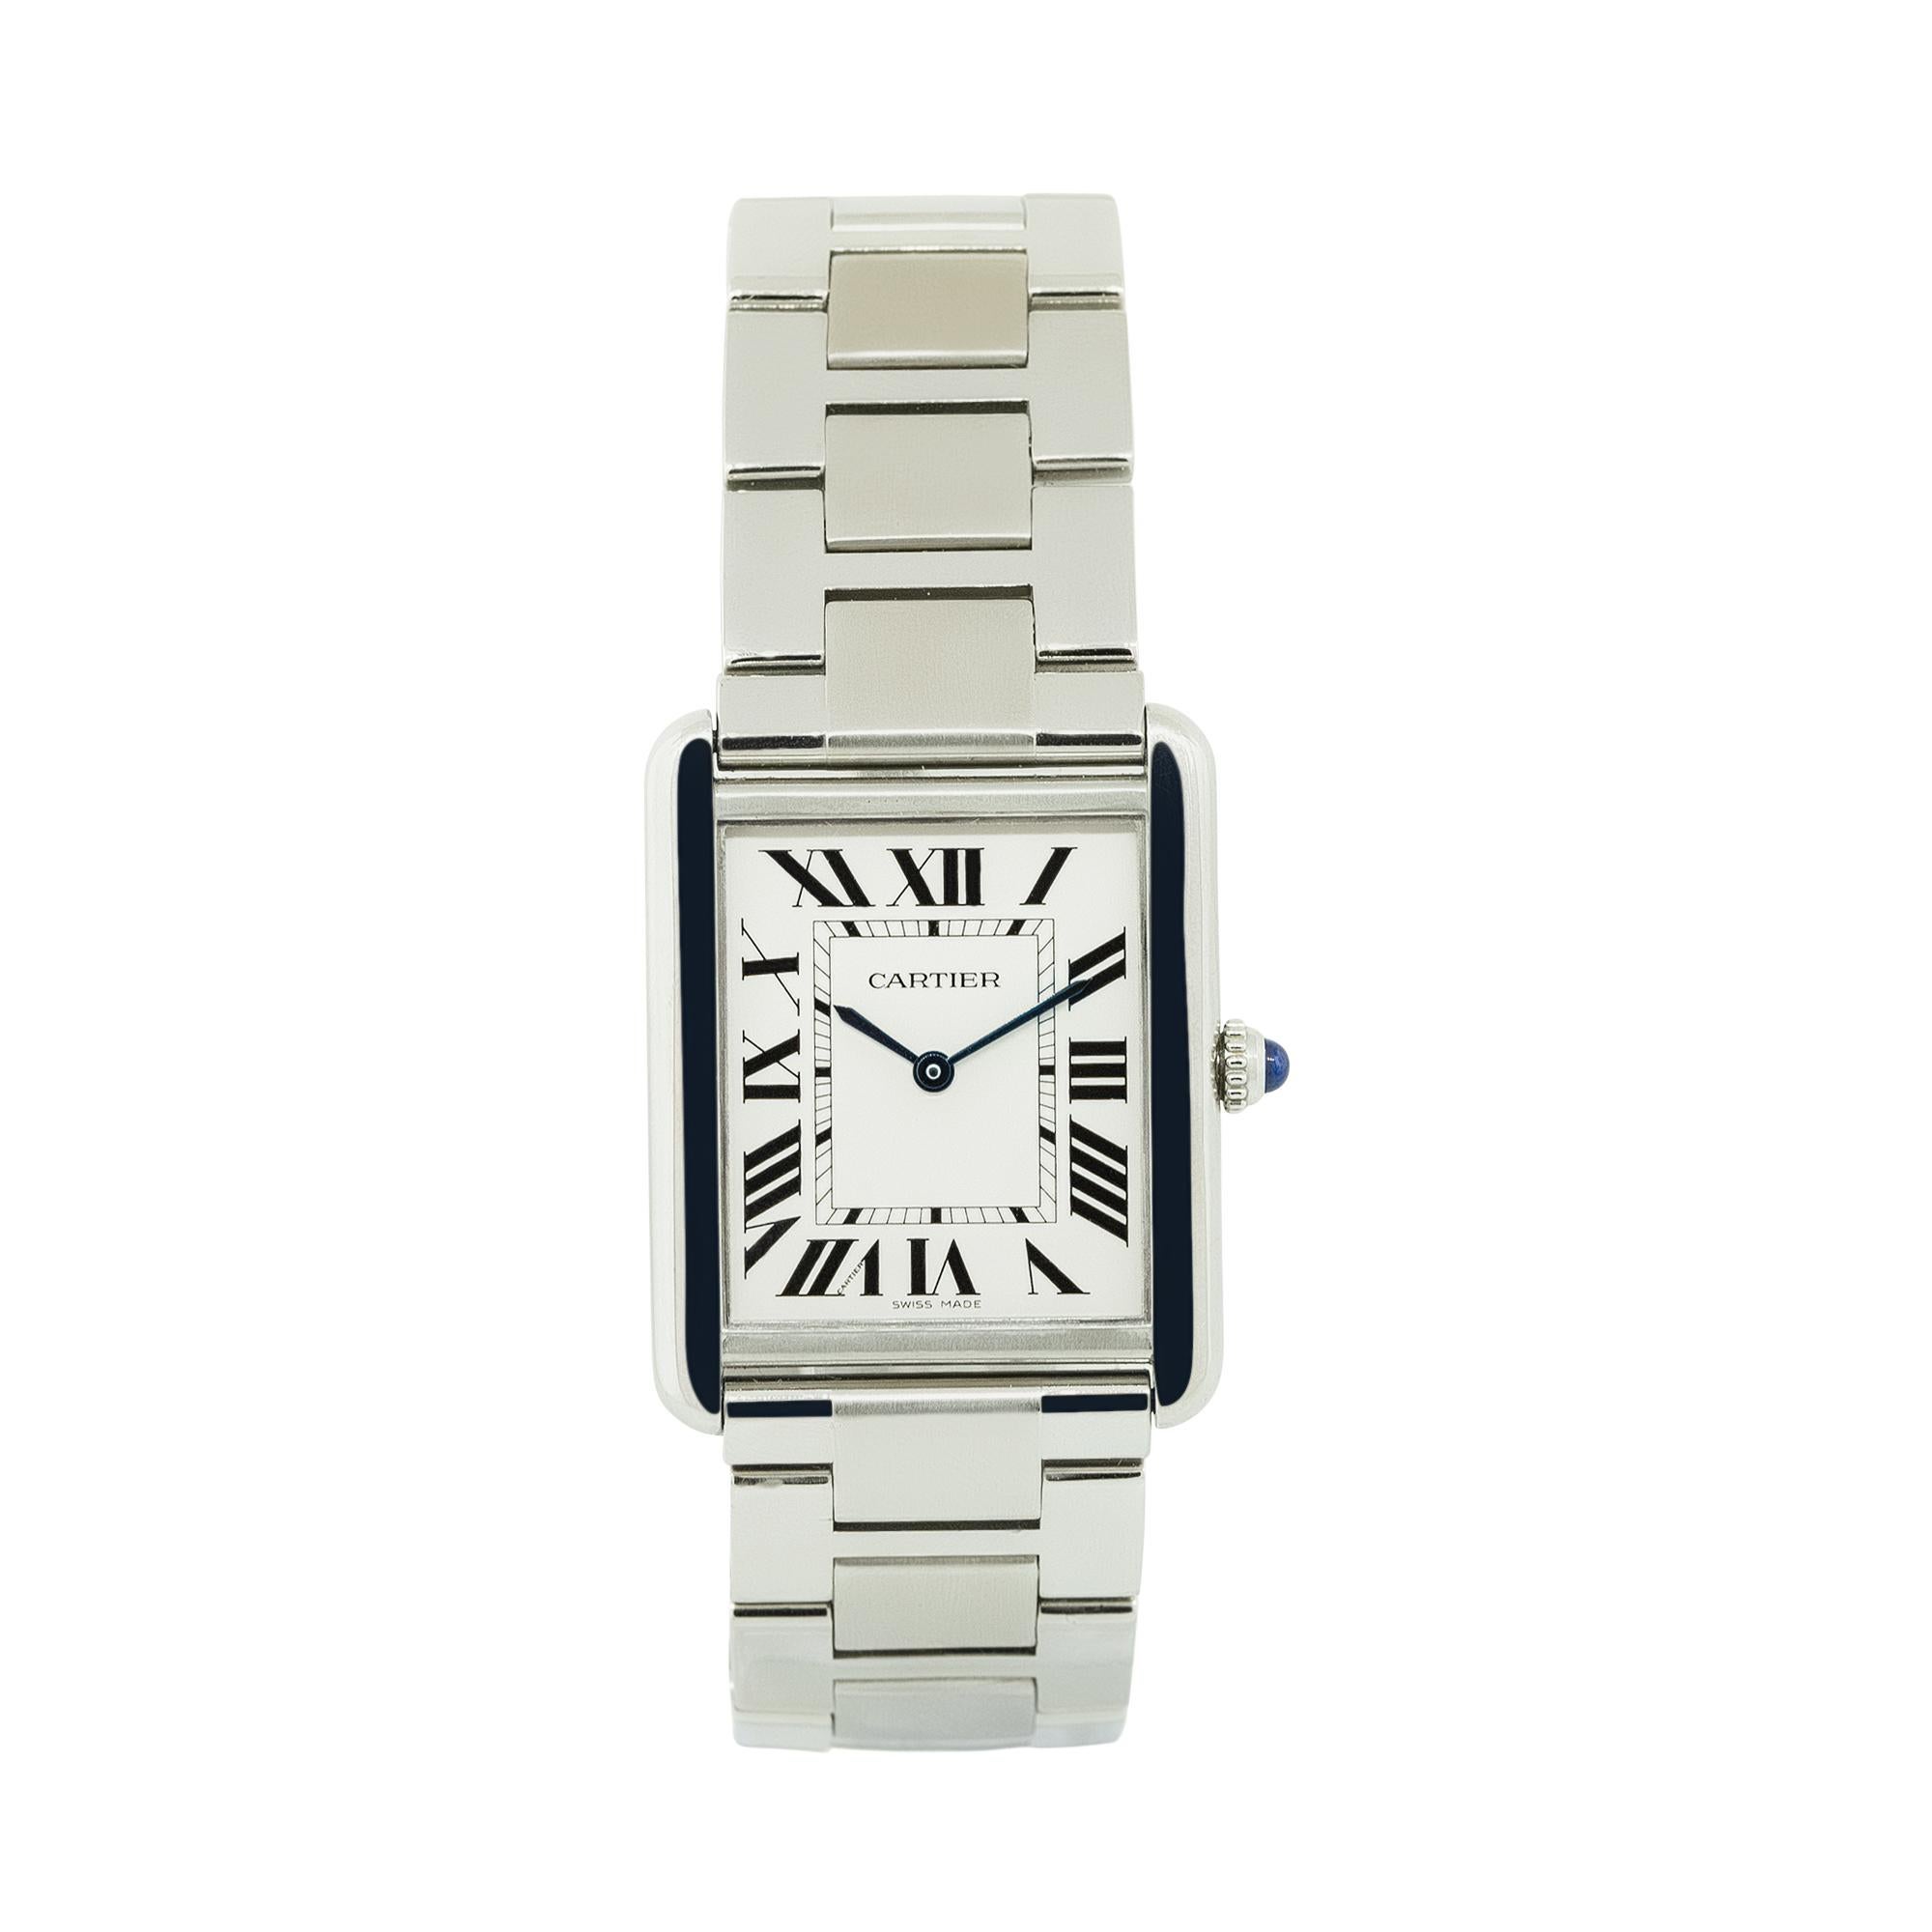 Brand: Cartier
Model: Cartier Tank Solo
Case Material: Stainless Steel
Case Diameter: 28mm
Dial: Off-White Roman Dial
Bezel: Fixed Smooth Stainless Steel Bezel
Bracelet: Stainless Steel
Movement: Quartz
Reference Number: 3169
Size: Will fit a 6.50